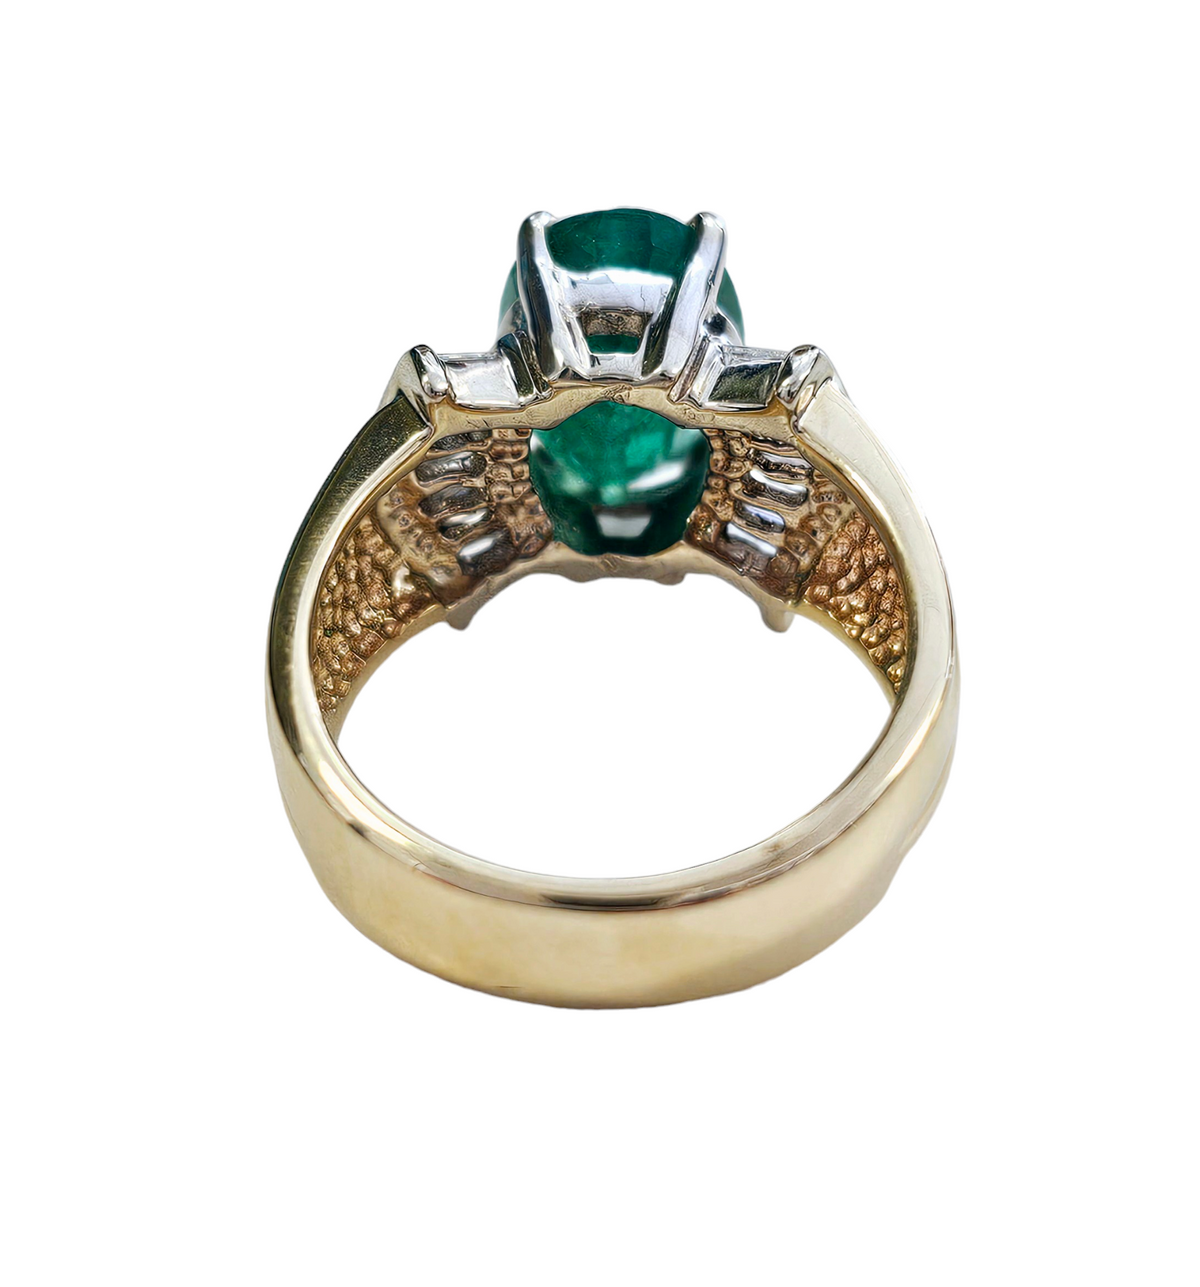 Oval-Cut Emerald and Bow Tie Style Baguette Cut Diamond Ring made in 14-Karat Yellow and White Gold